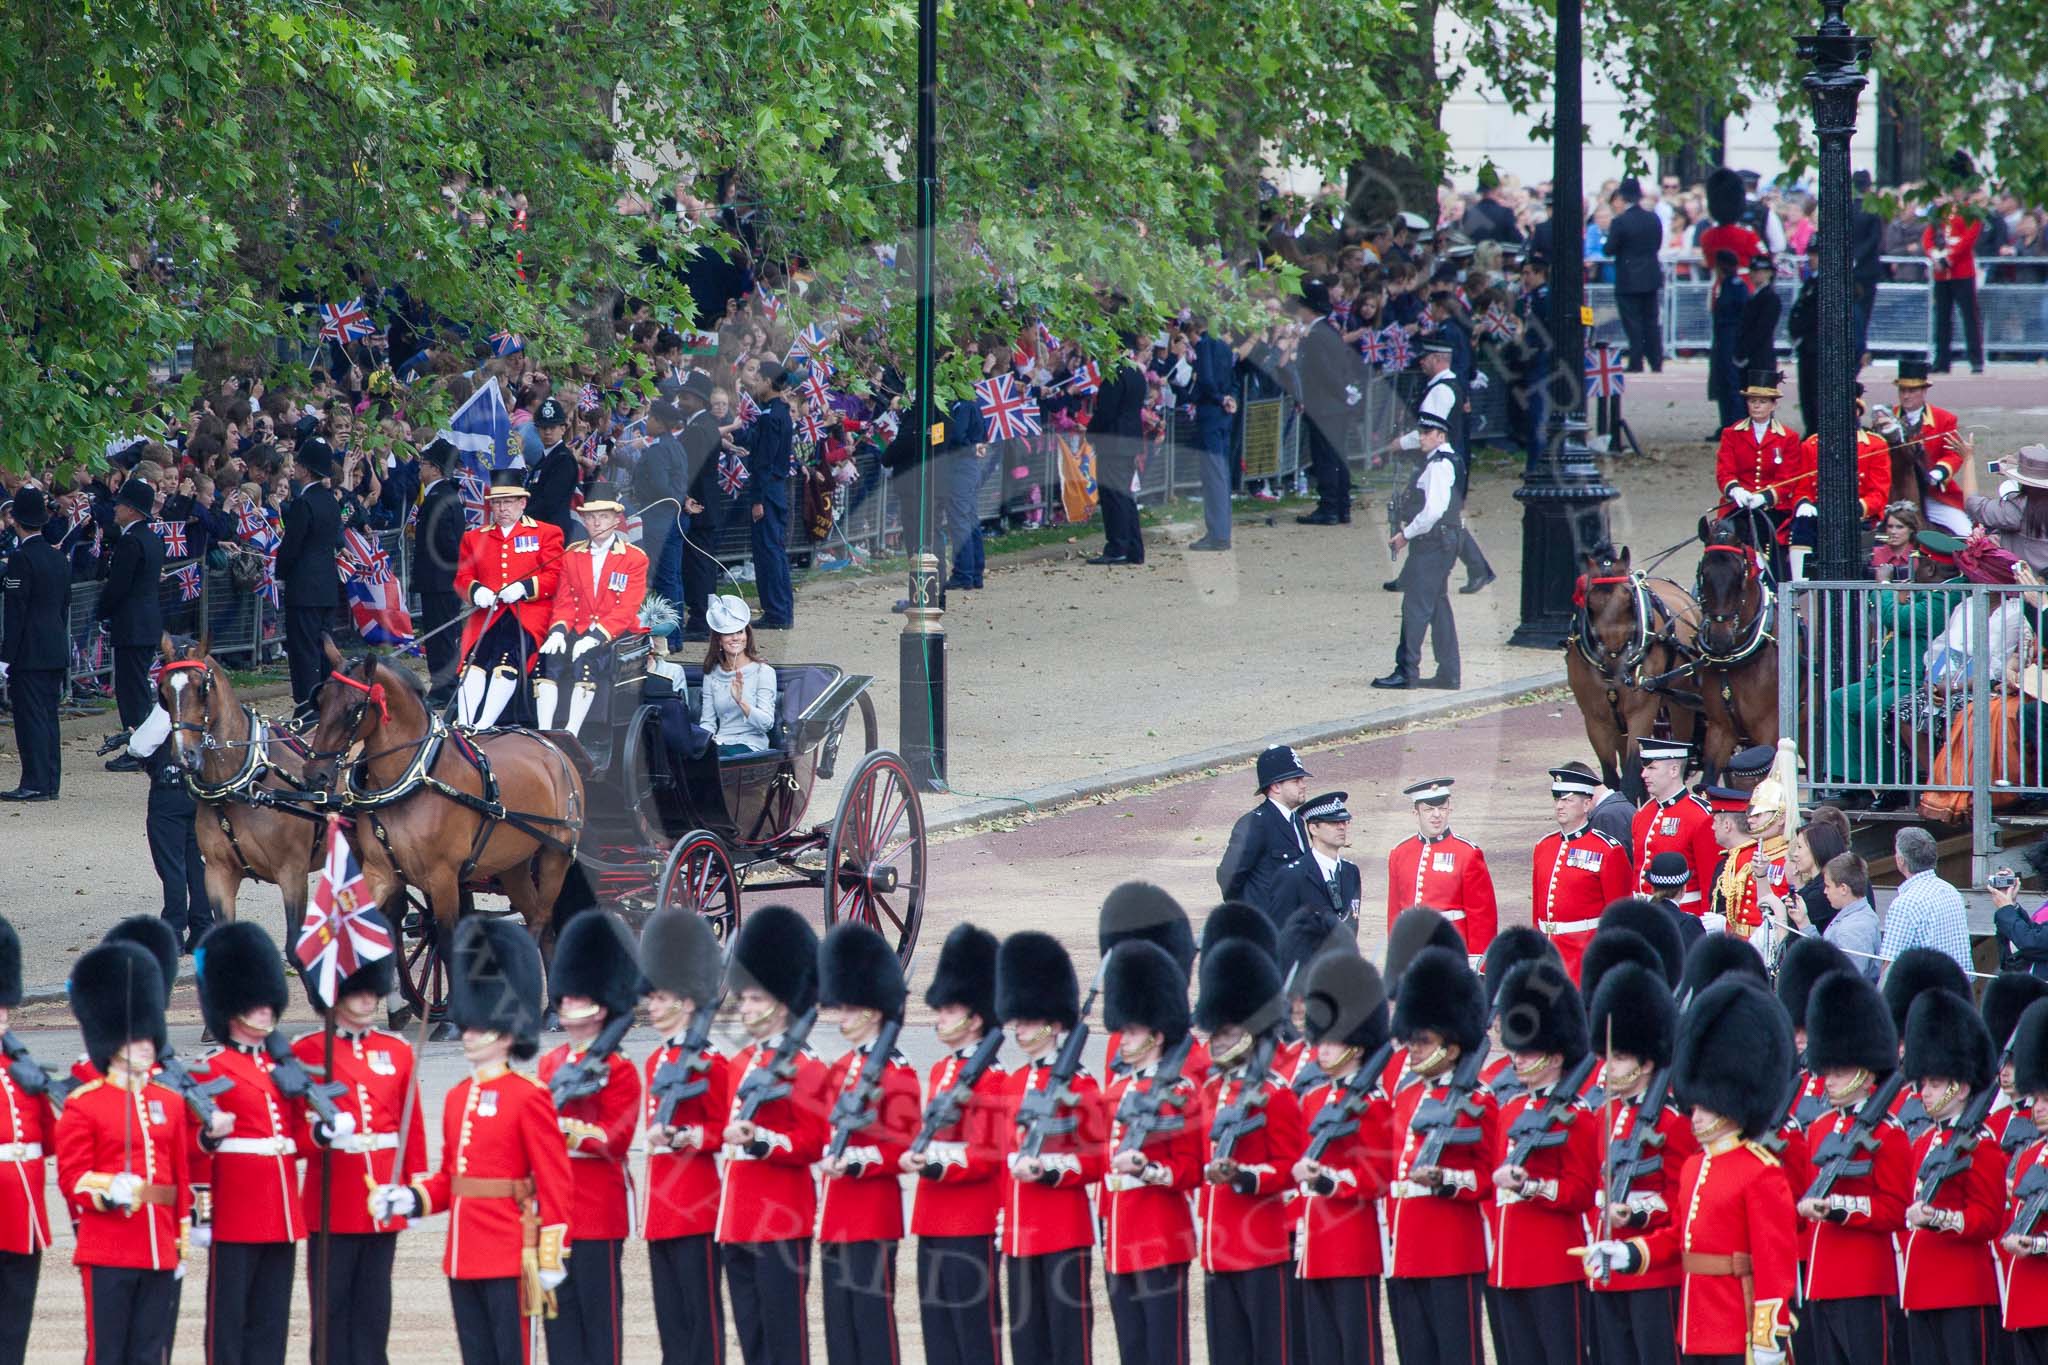 Trooping the Colour 2012: The first carriage coming down the approach road from the Mall, carrying The Duchess of Cambridge, the Duchess of Cornwall, and Prince Harry..
Horse Guards Parade, Westminster,
London SW1,

United Kingdom,
on 16 June 2012 at 10:49, image #112